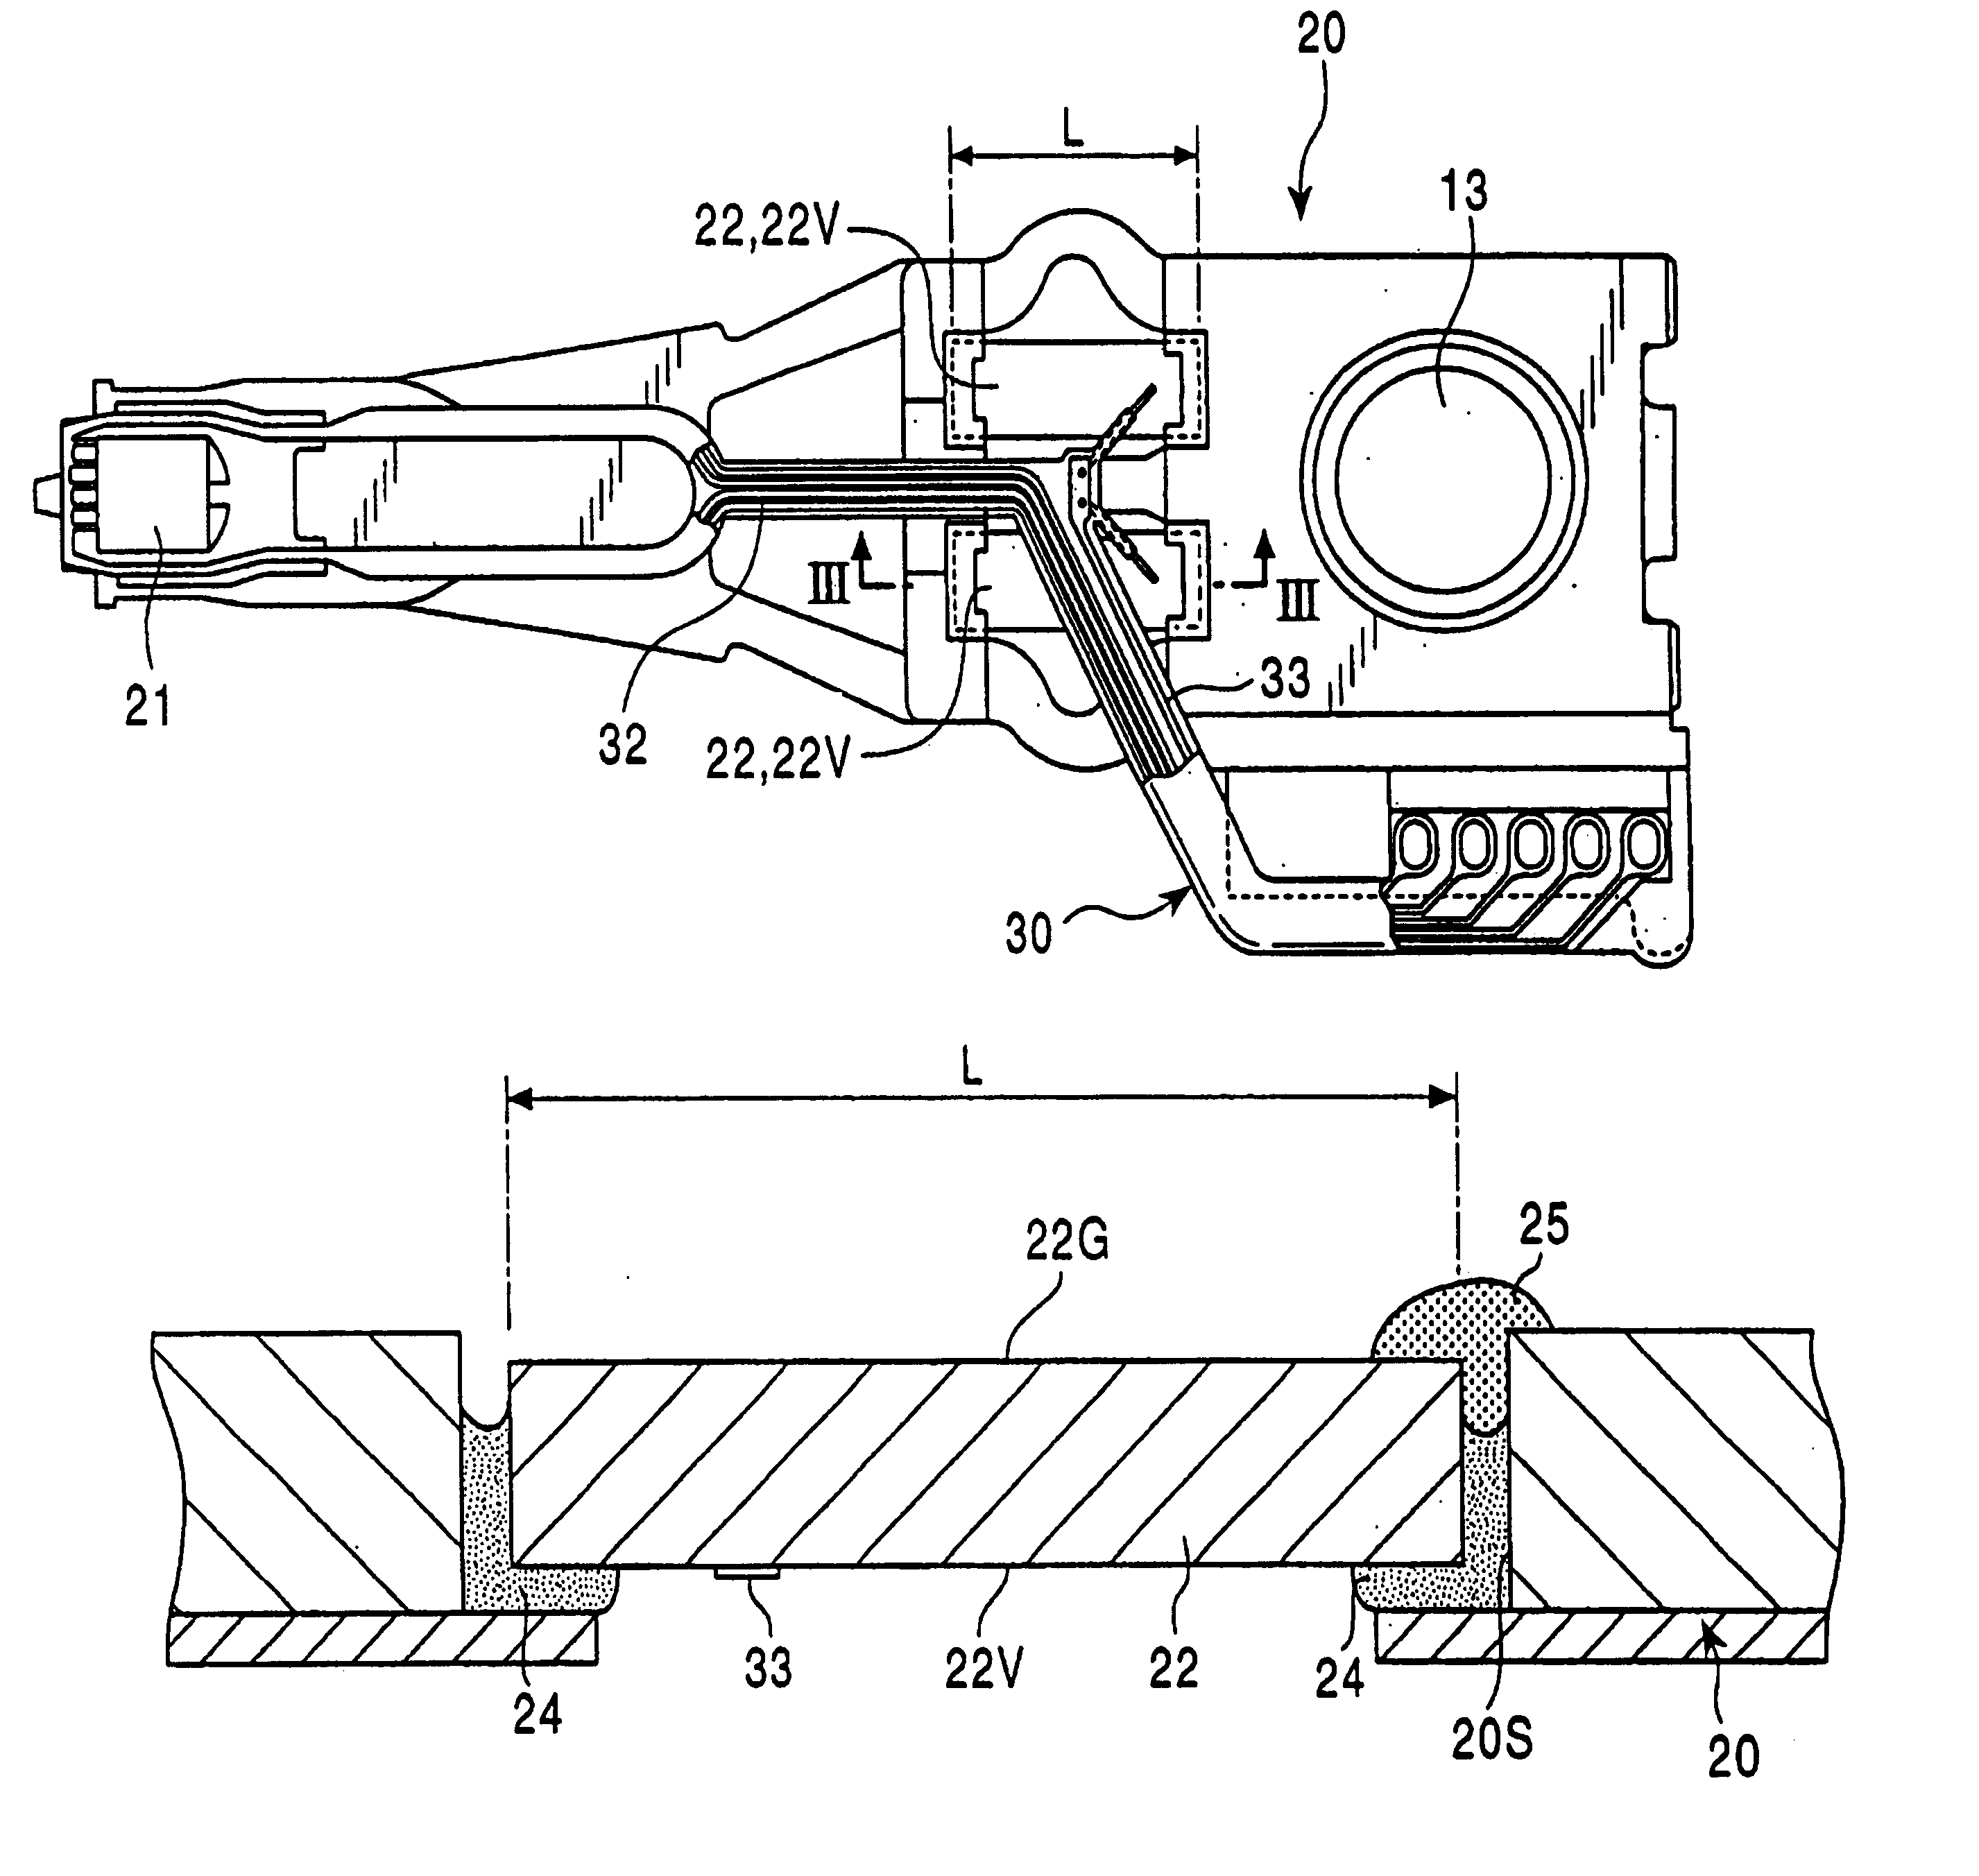 Magnetic head actuator having finely movable tracking device